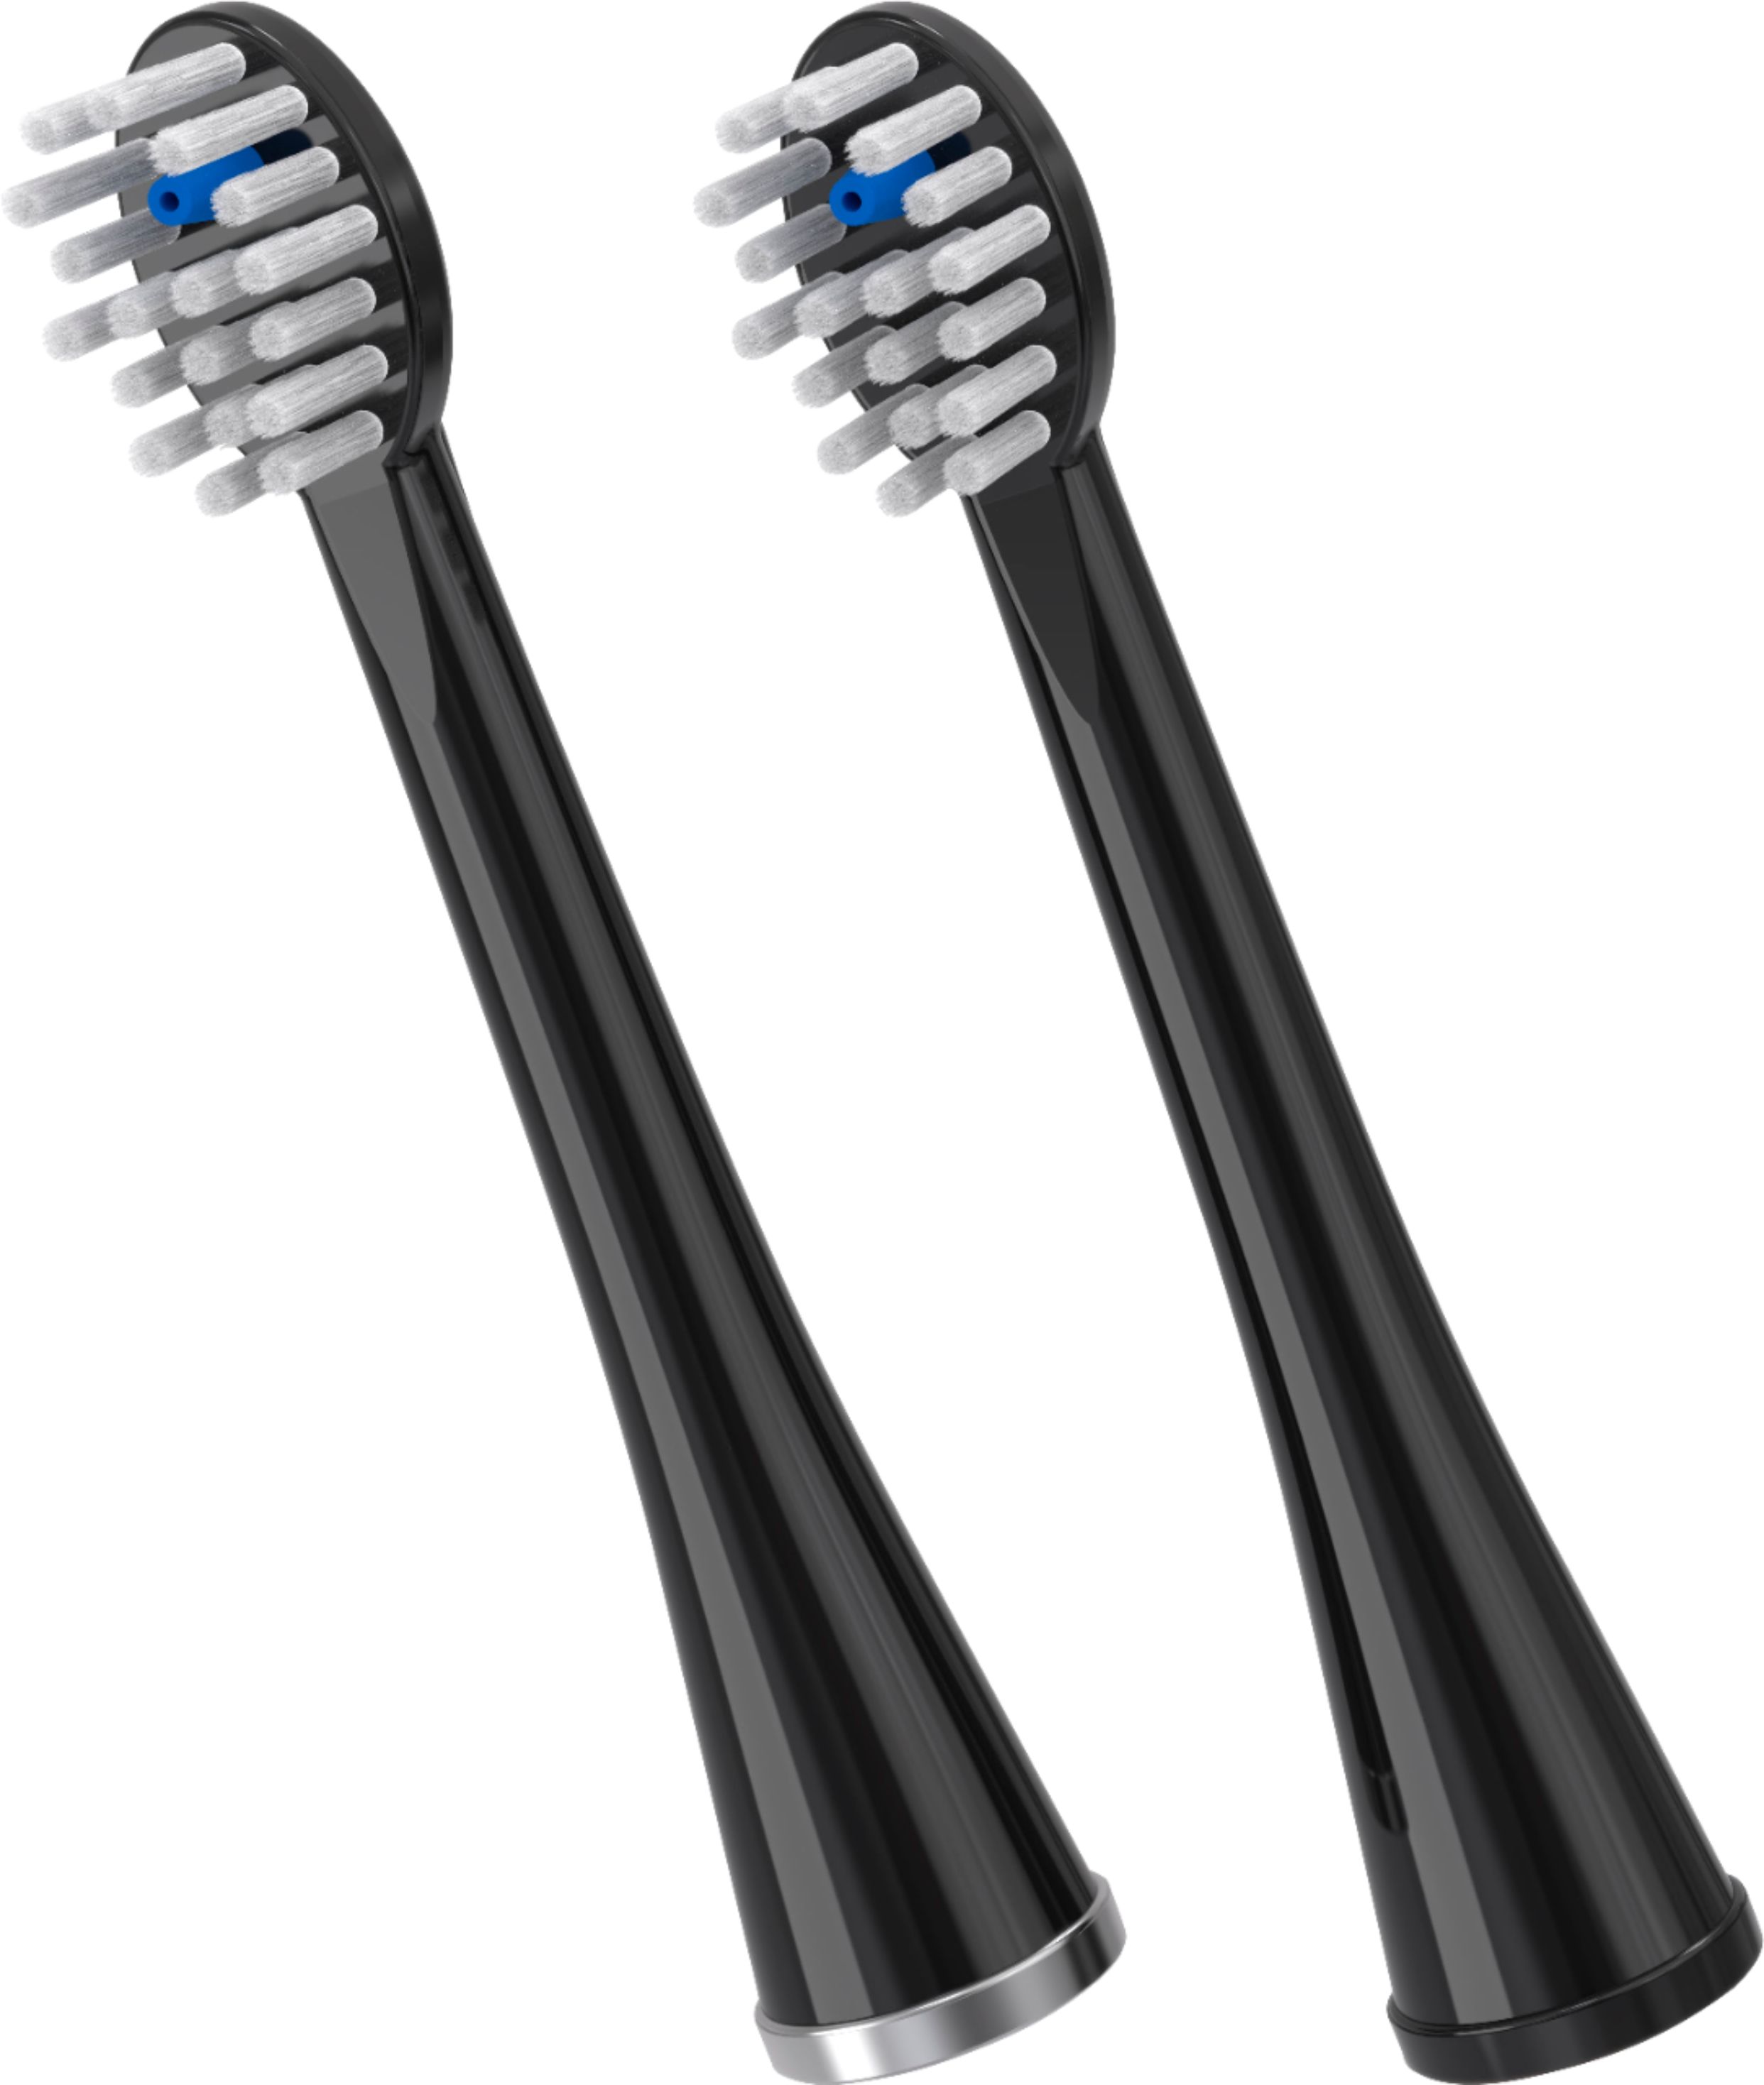 Angle View: Waterpik - Sonic-Fusion Compact Replacement Flossing Brush Heads- Black with Chrome - Black